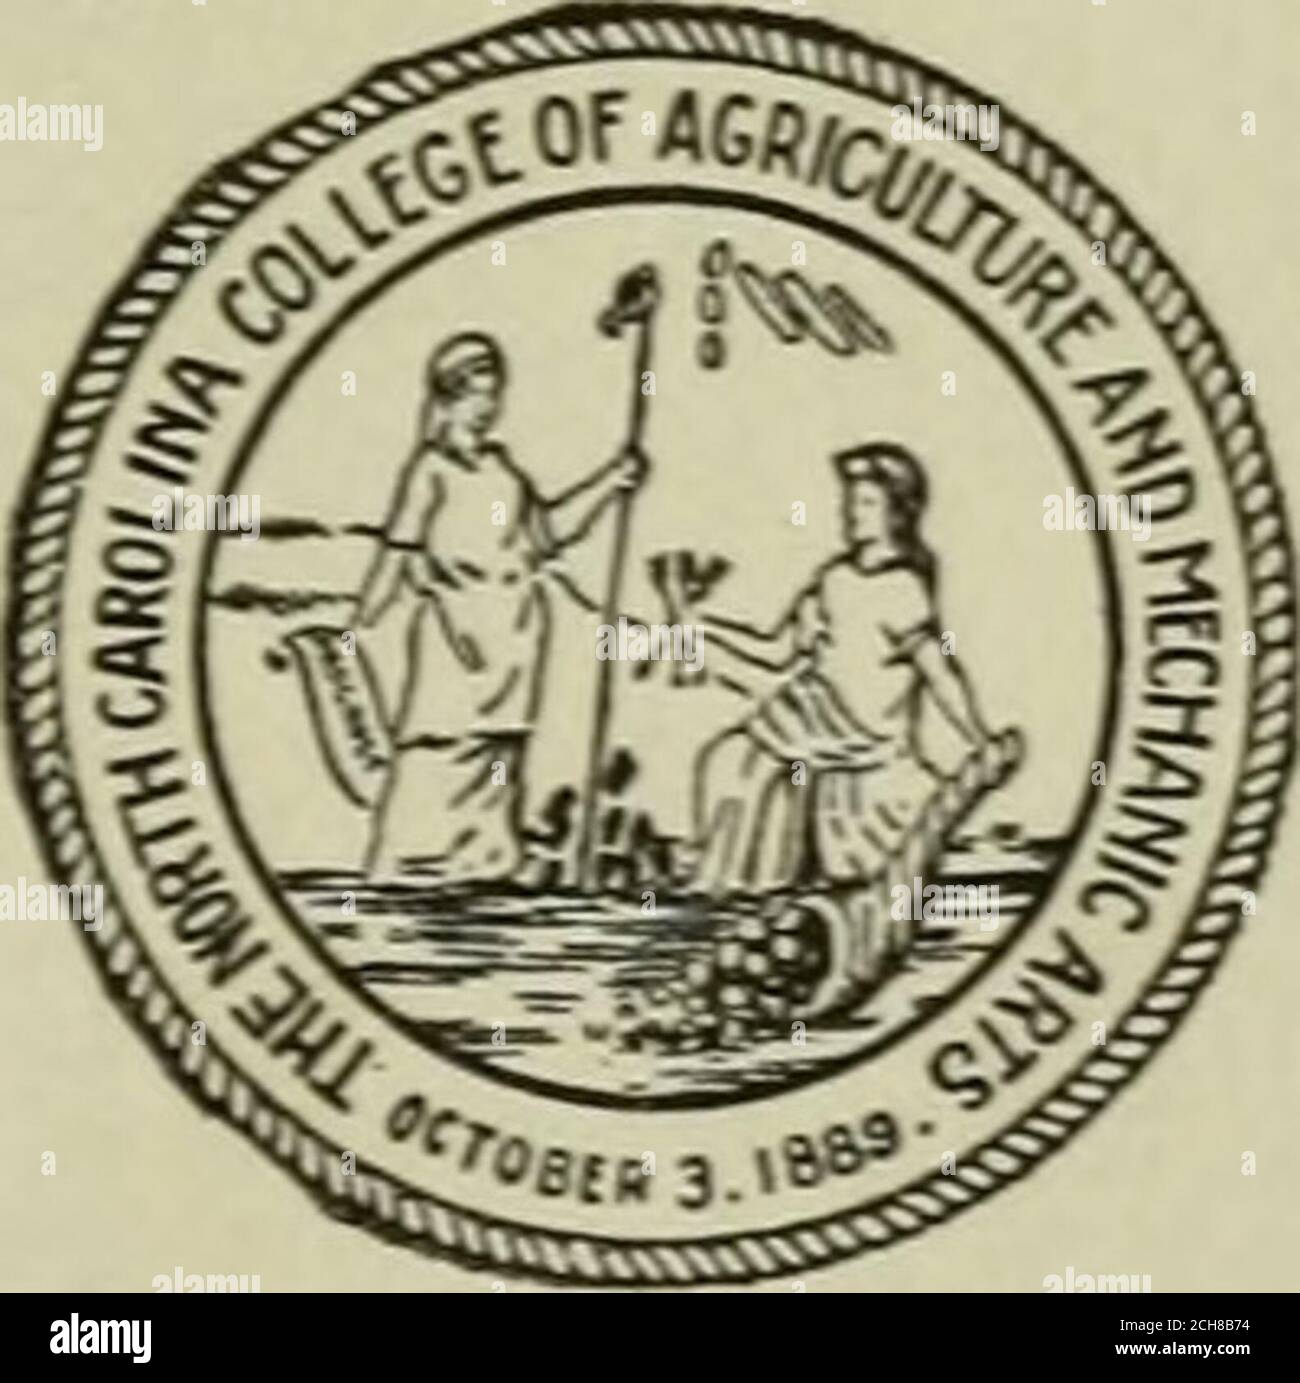 . Annual catalogue of the North Carolina College of Agriculture and Mechanic Arts . THE NORTH CAROLINA COLLEGE AGRICULTURE AND MECHANIC ARTS WEST RALEIGH 1915-1916. RALEIGH Edwabds & Beovghton Peivting Compant State Peintees and Bindebs 1916 Calendar 1916 JANUARY 1 APRIL 1 JULY OCTOBER 1 S M TW T F s1 s|m T W T F 81 8 m T W T F S 1 SM TW T 12 3 4 5 F6 8 7 2 3 4 5 6 7 8 2 3 4 5 6 7 8 2 3 4 6 6 7 8 8 9 10 1112 13 14 9 10 1i;i2il3ll4!l5i 9110 11112 13 14 15 9I10111I12113 14 15 15 16,17 18 19,20 21 16 1718 19 20 21 22 1617 18 19 20;21 22 16 17 IS 19,2021 22 22 23 24 25 26 27 28 23 24 25 26 27 2S 2 Stock Photo